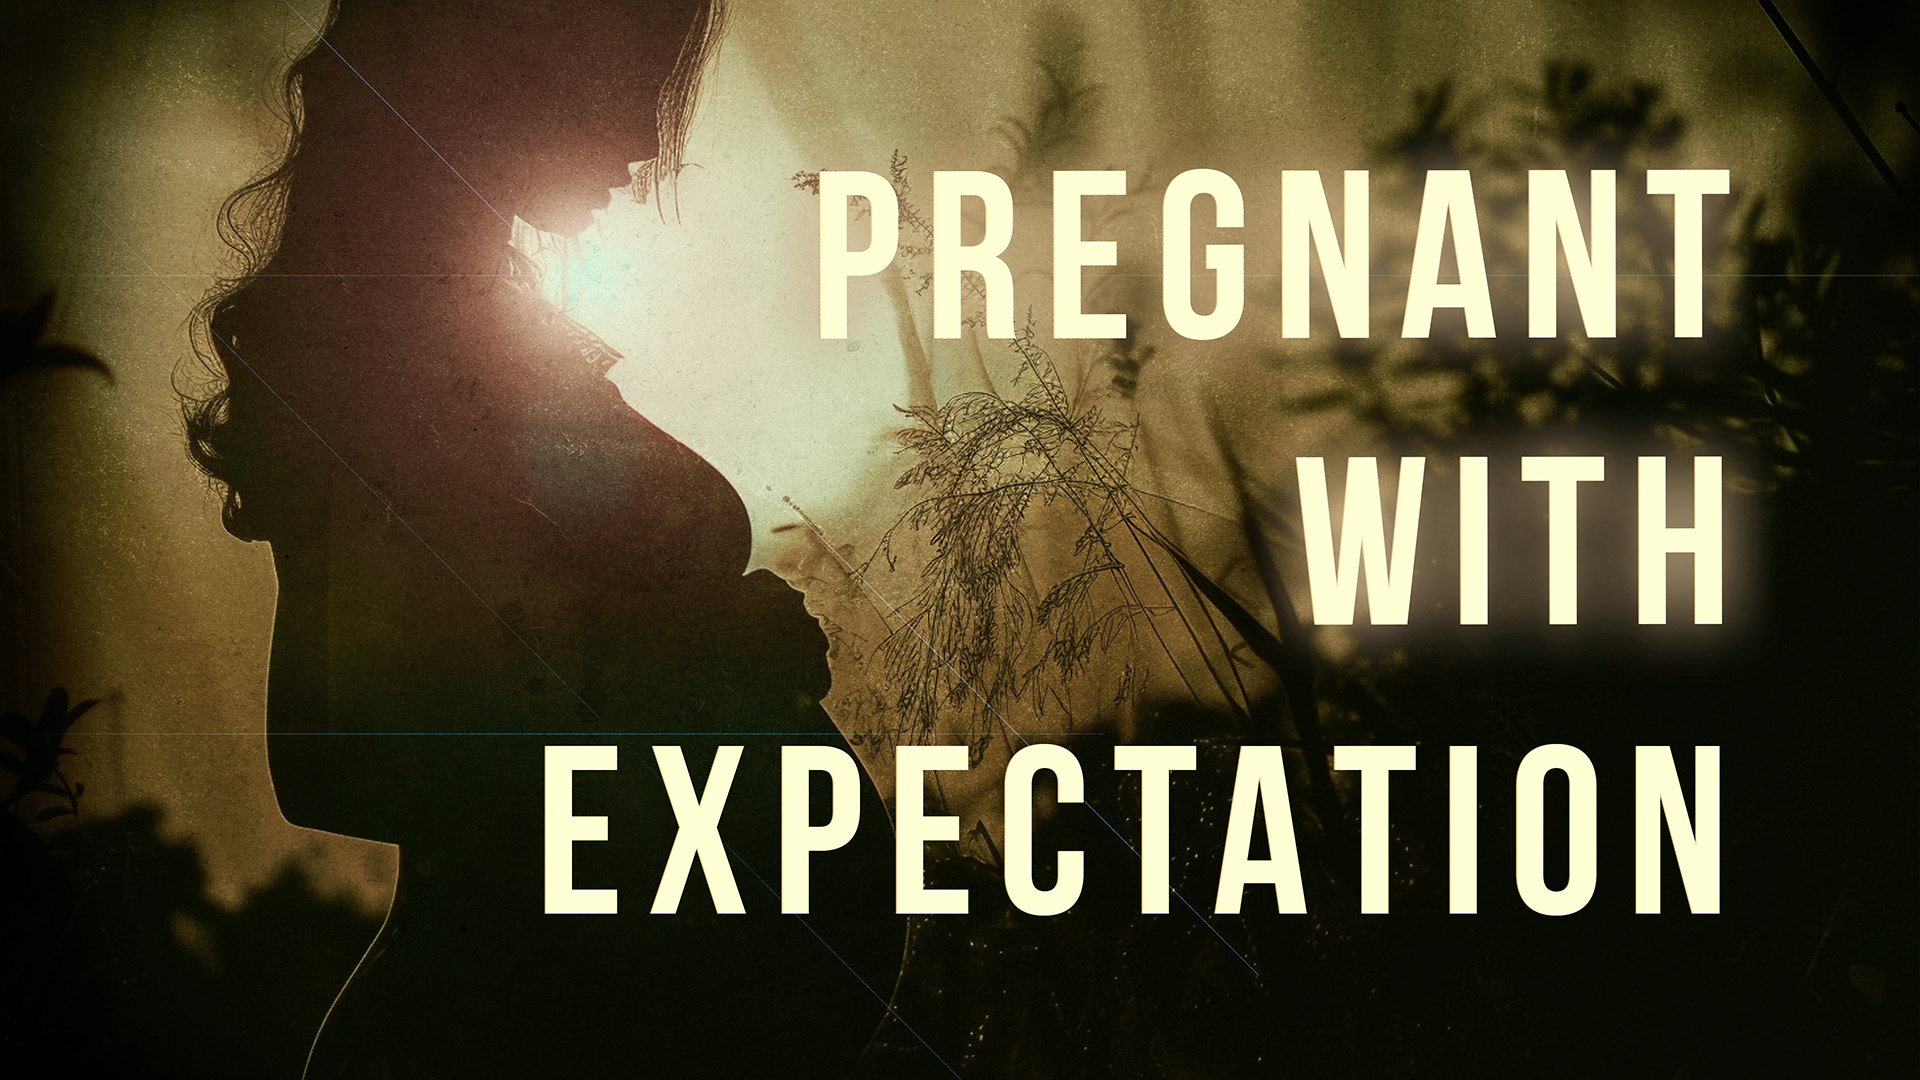 Pregnant With Expectation